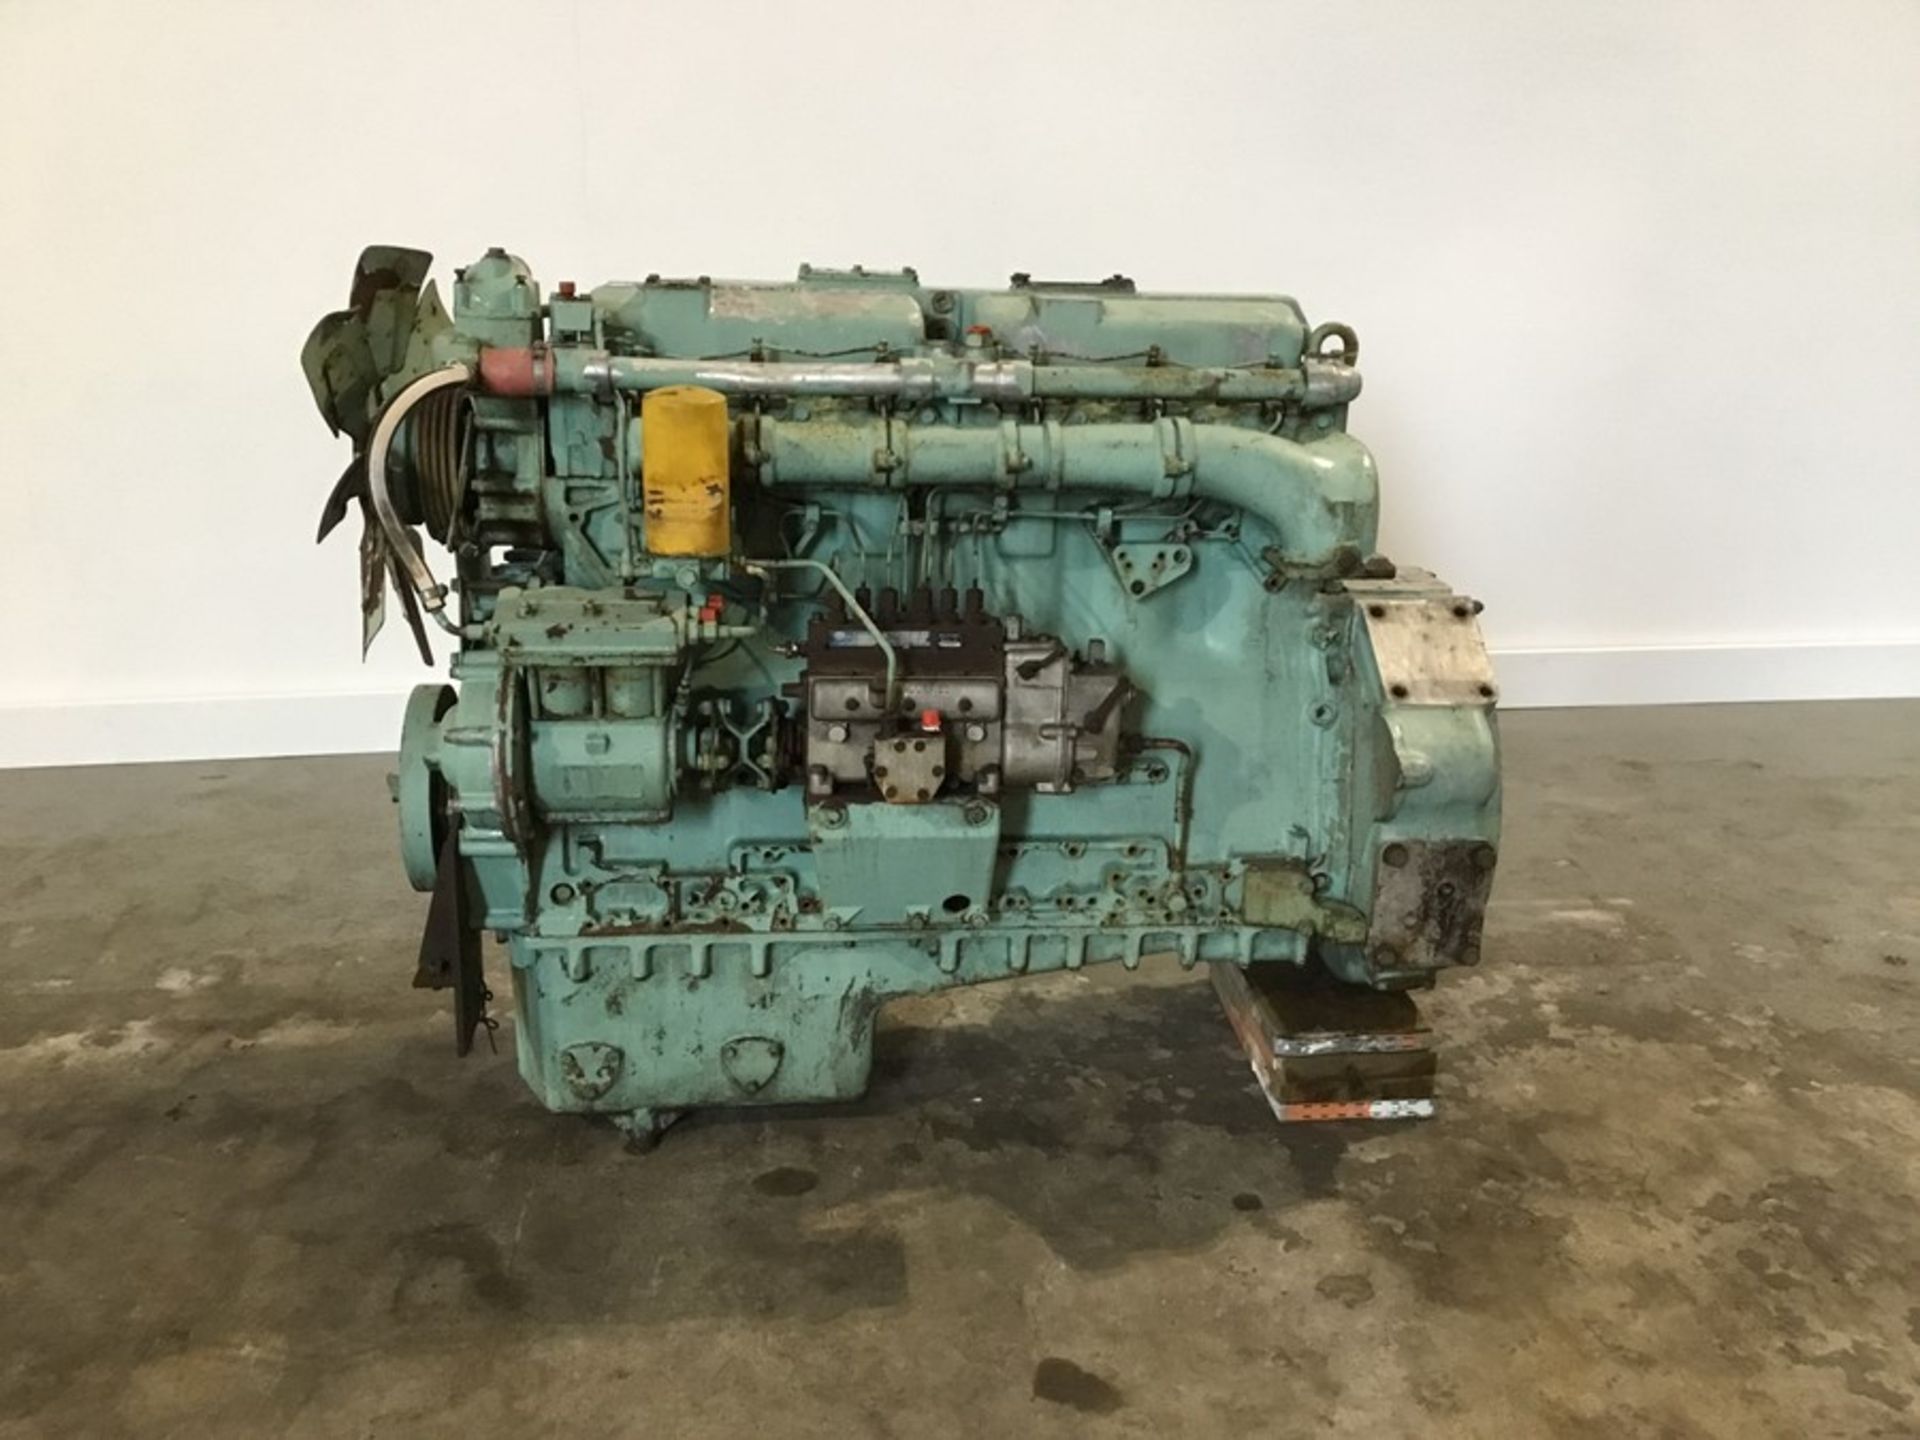 Rolls Royce E220 Diesel engine: Rolls Royce E220 6cyl serial number 628223D-1454/48614 Build - Image 7 of 18